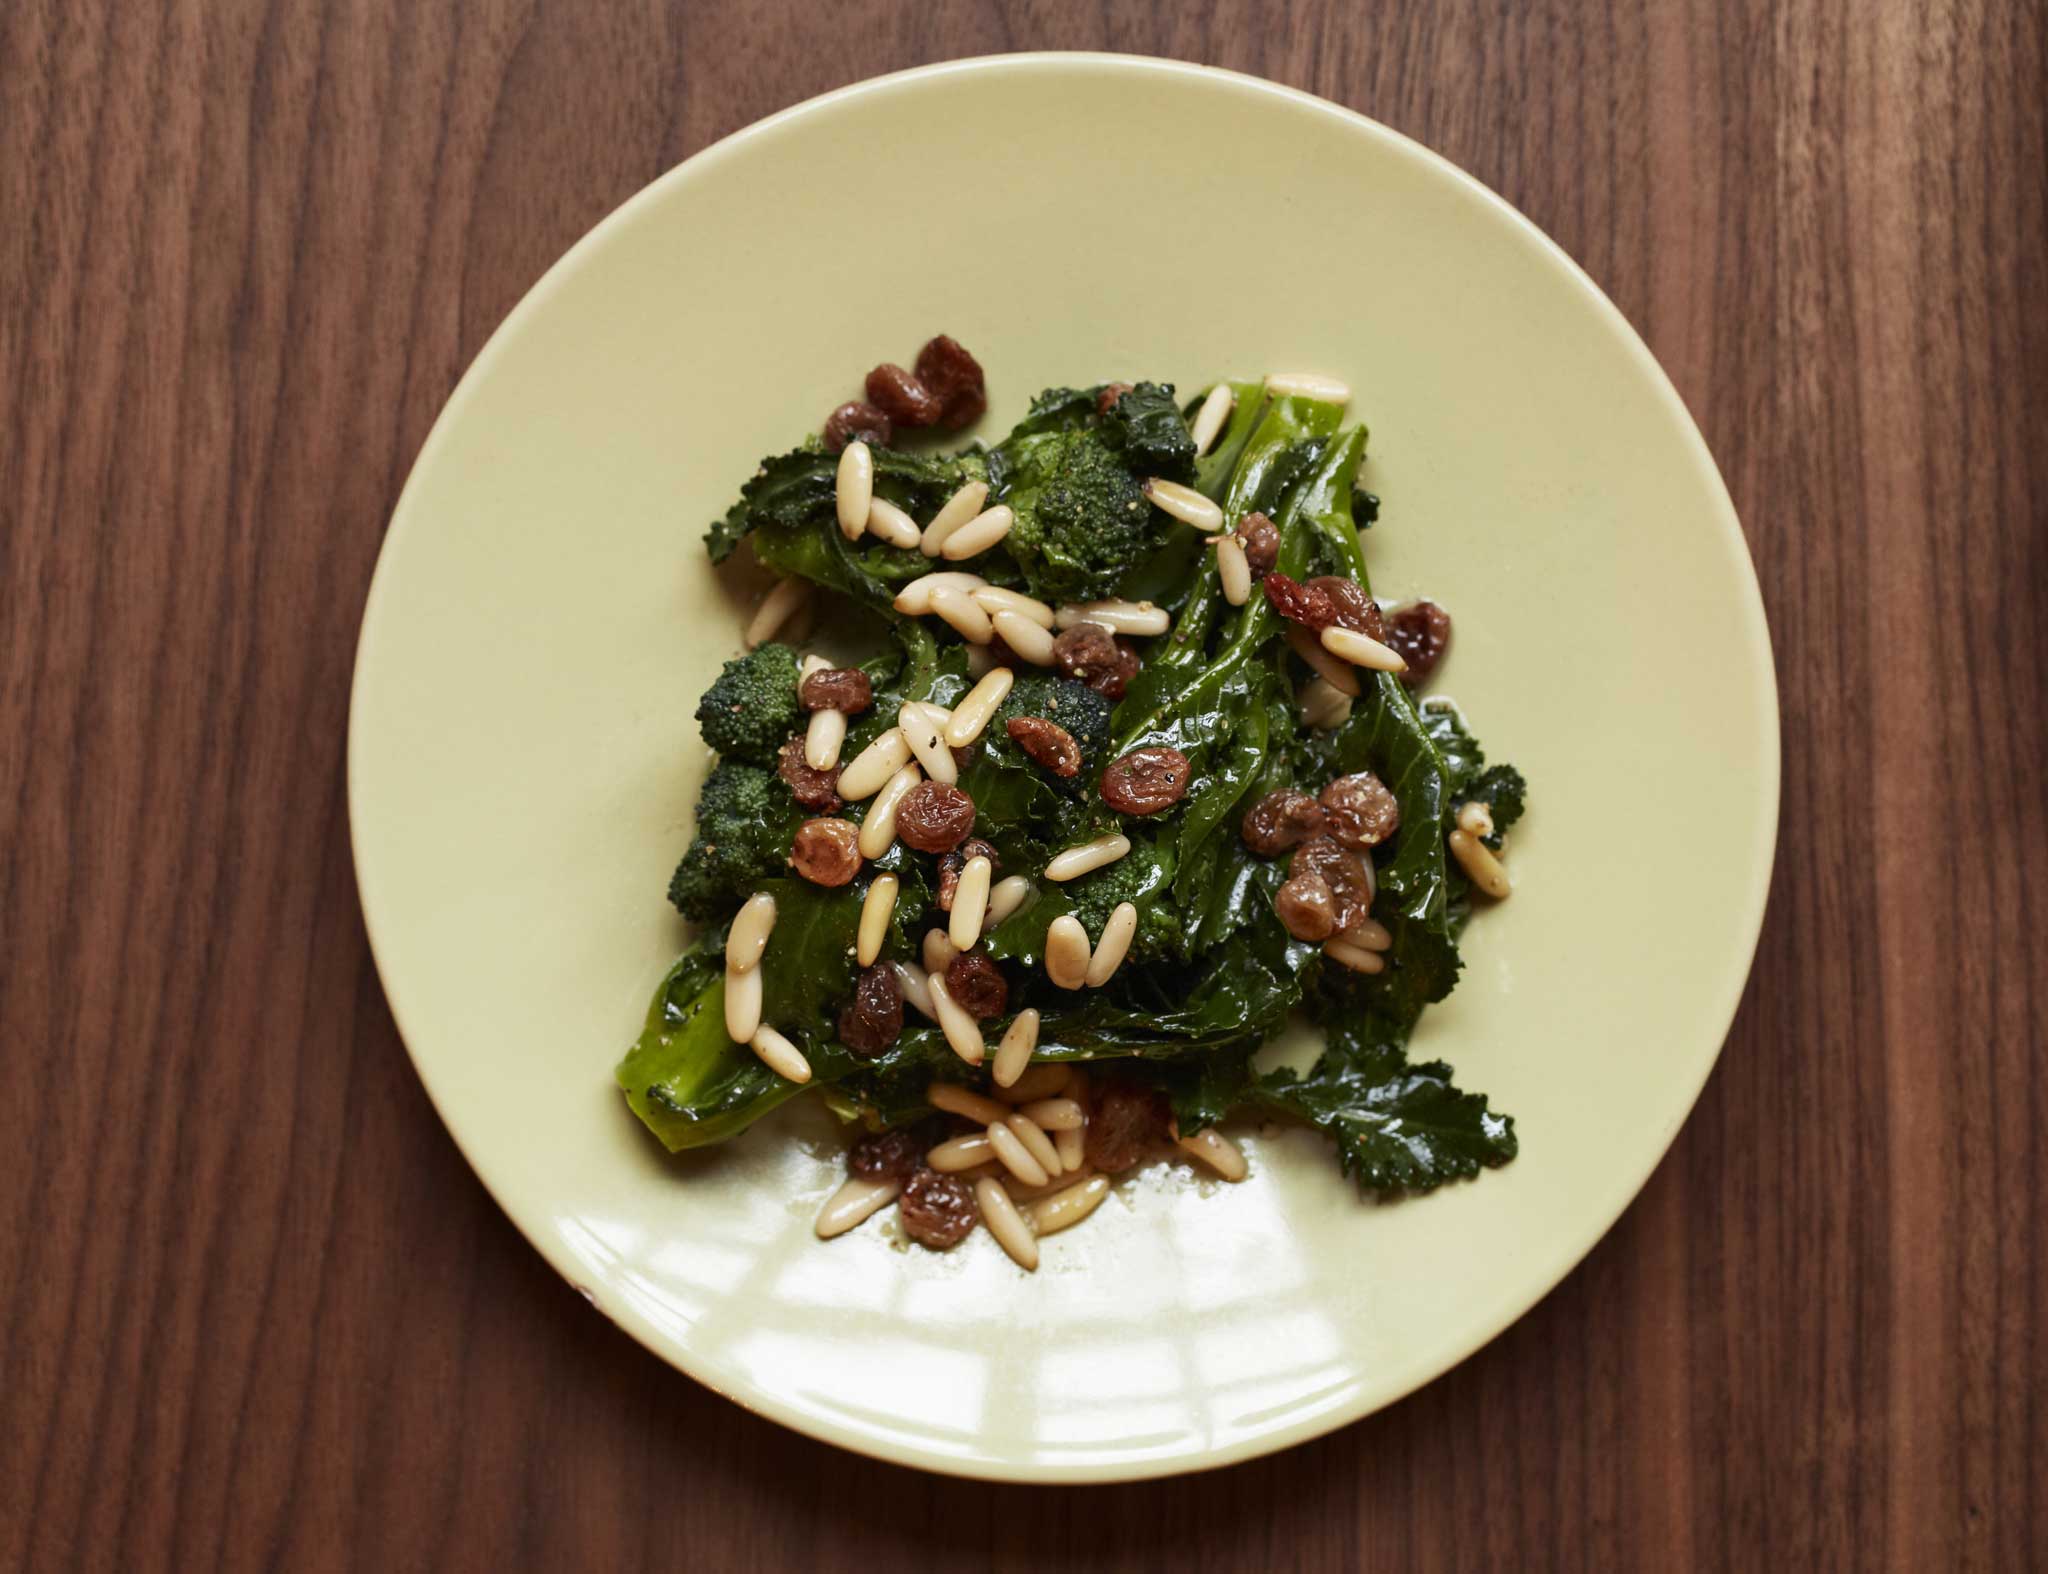 Sprouting broccoli salad with raisins and pine nuts